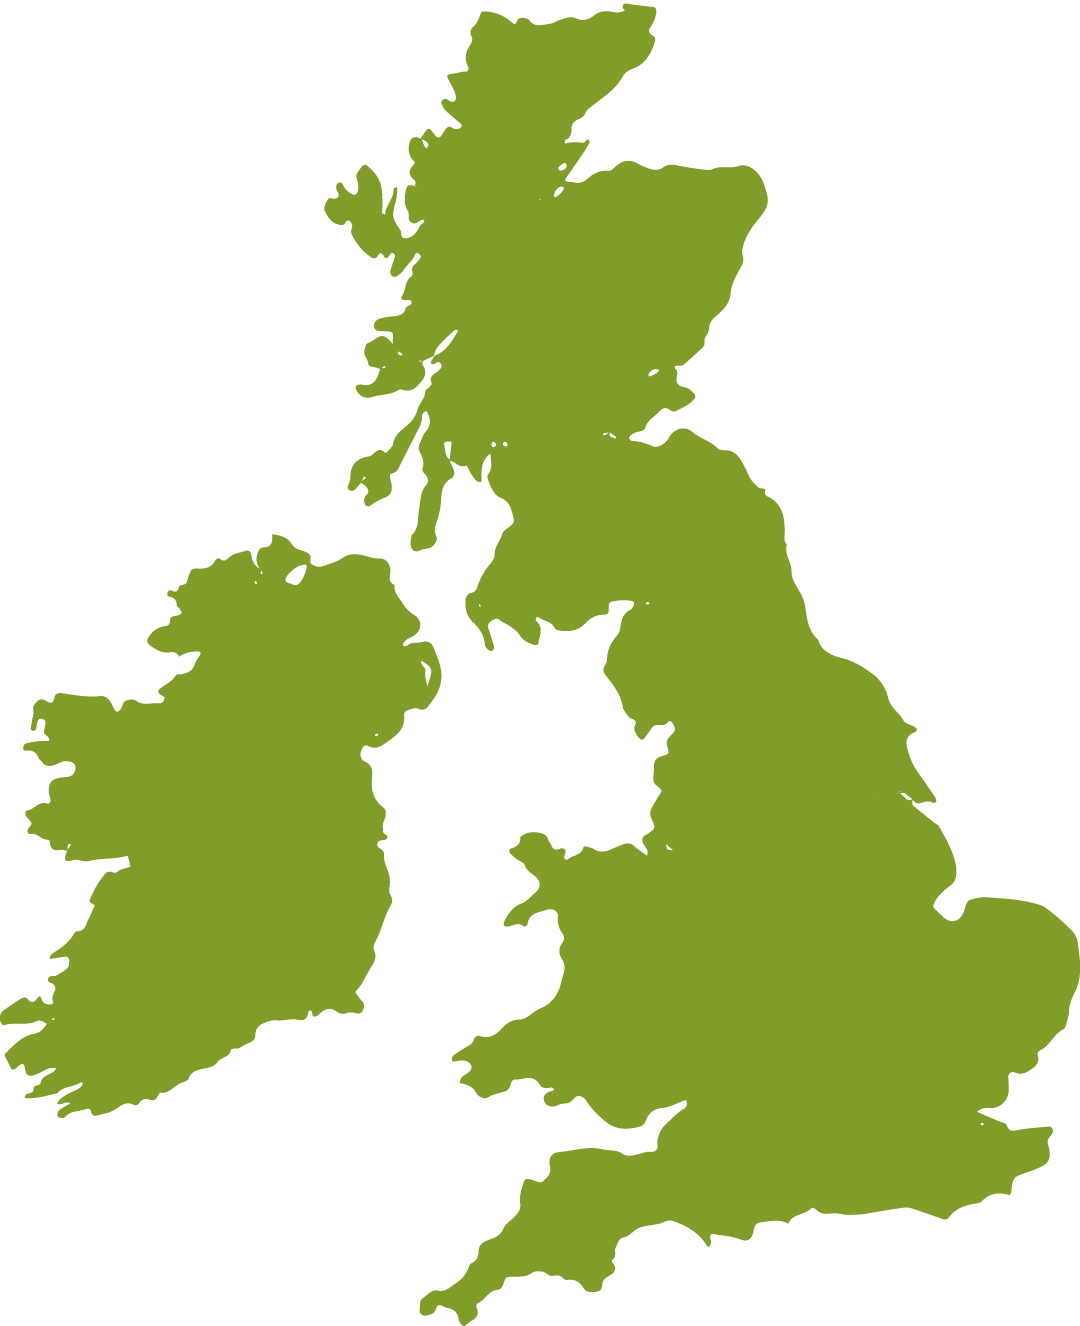 Static green map of the UK